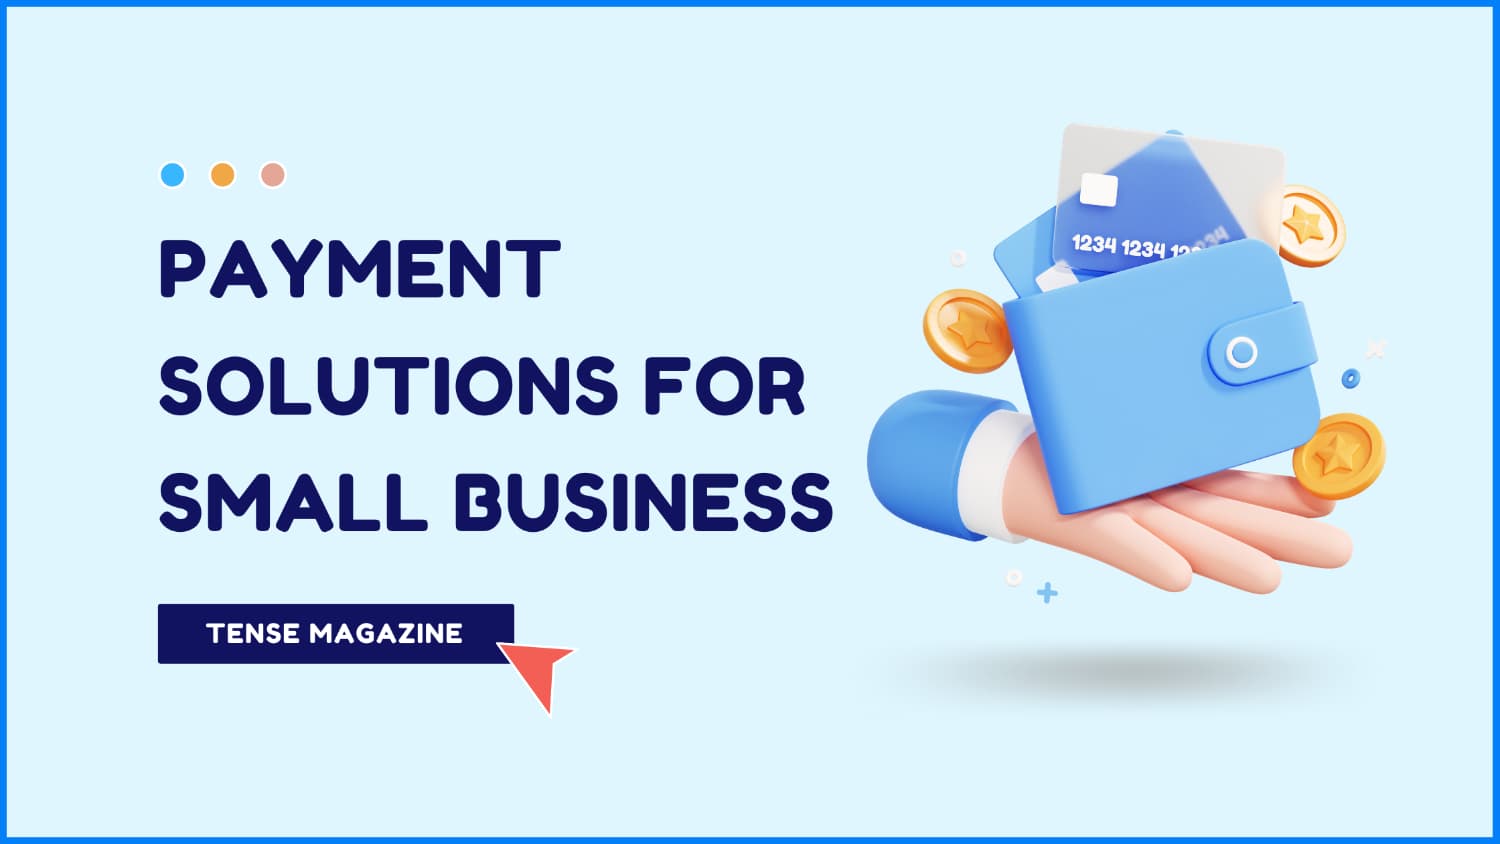 5 Best Payment Solutions for Small Businesses in 2023